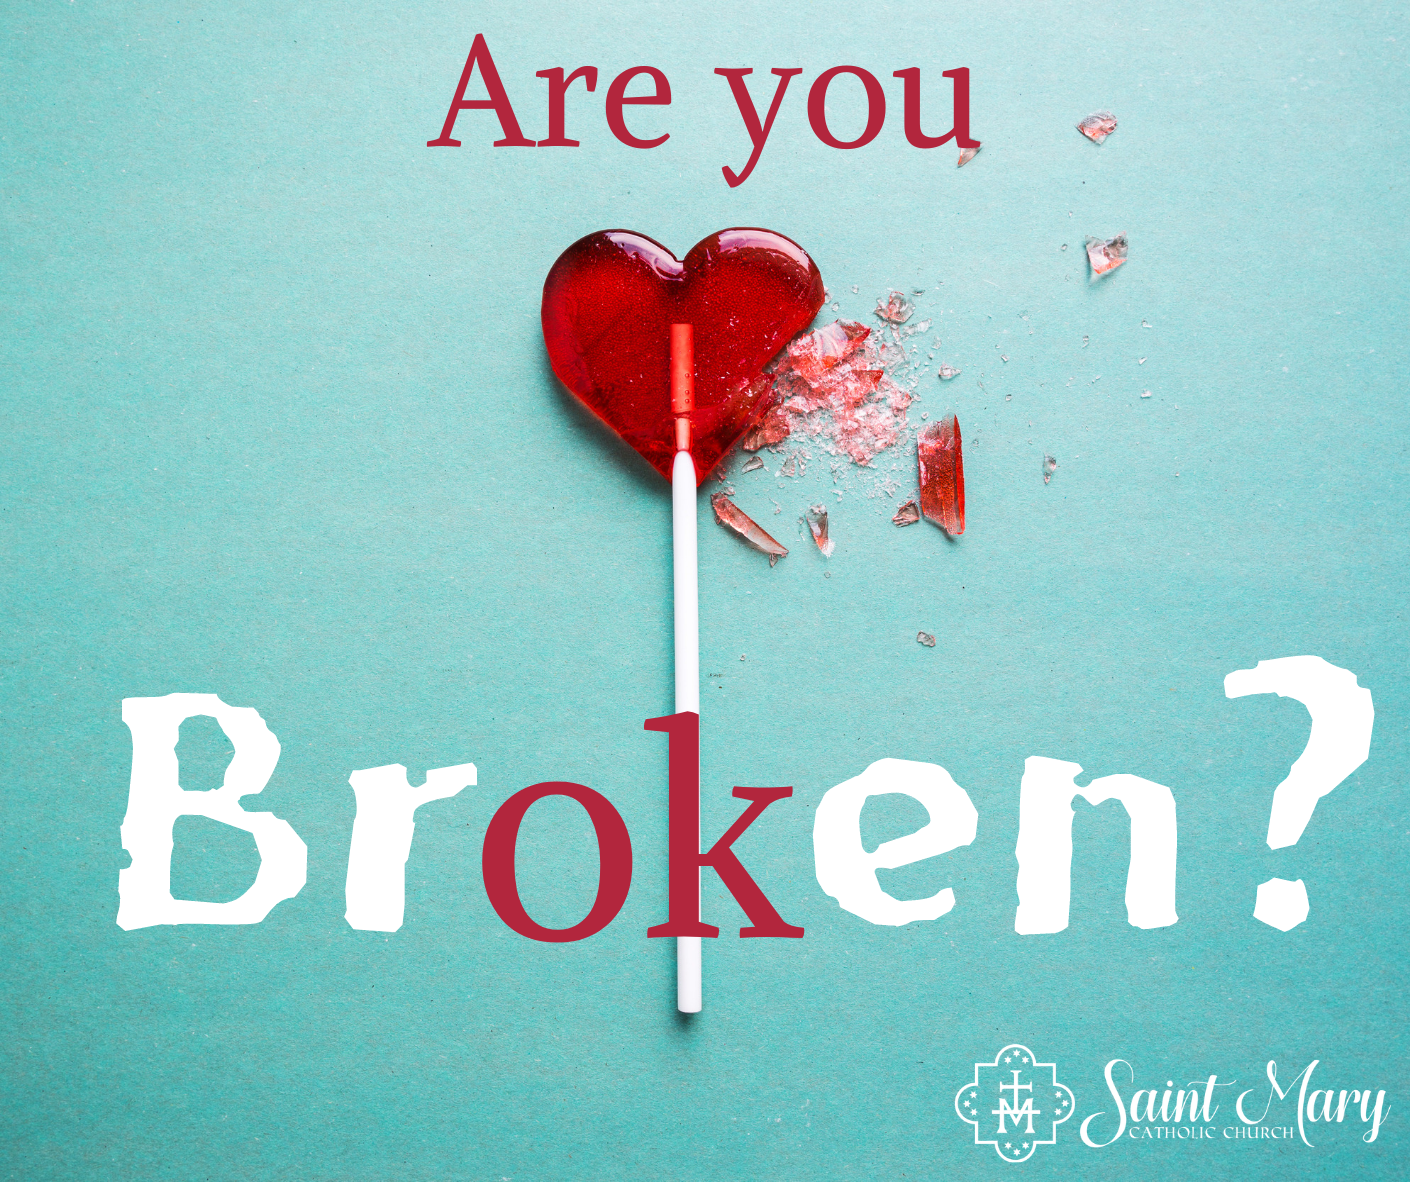 Broken: Good News in Tough Times, Labor Pains